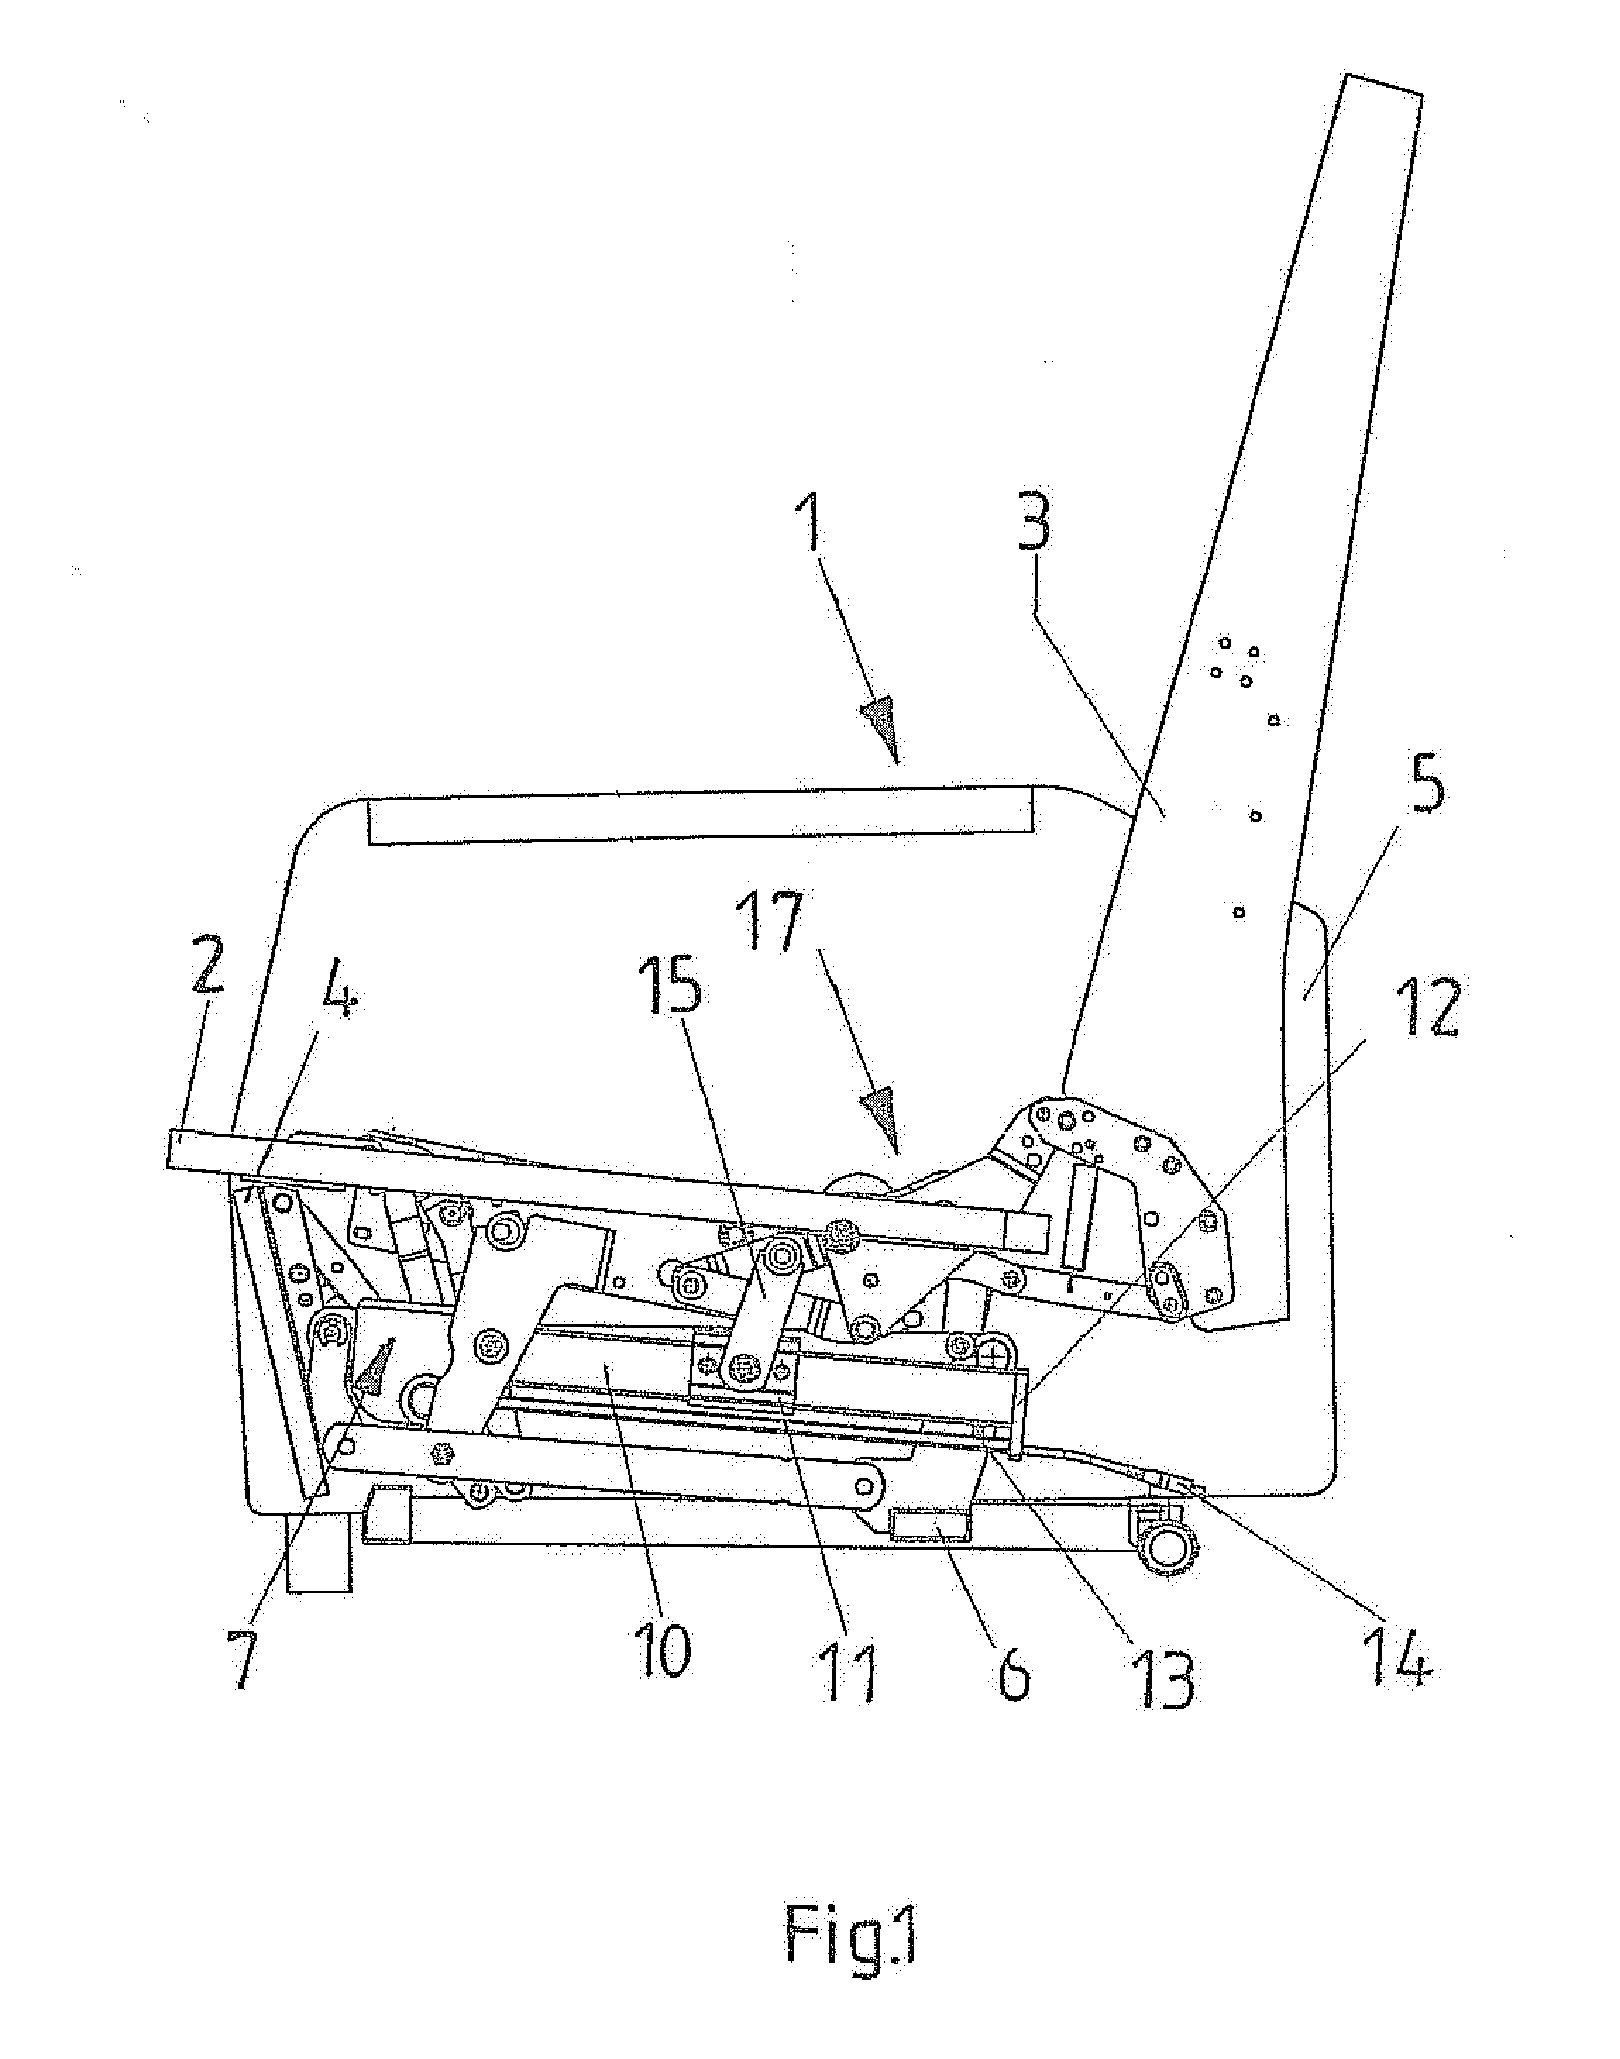 Chair or couch with motor-driven movable parts